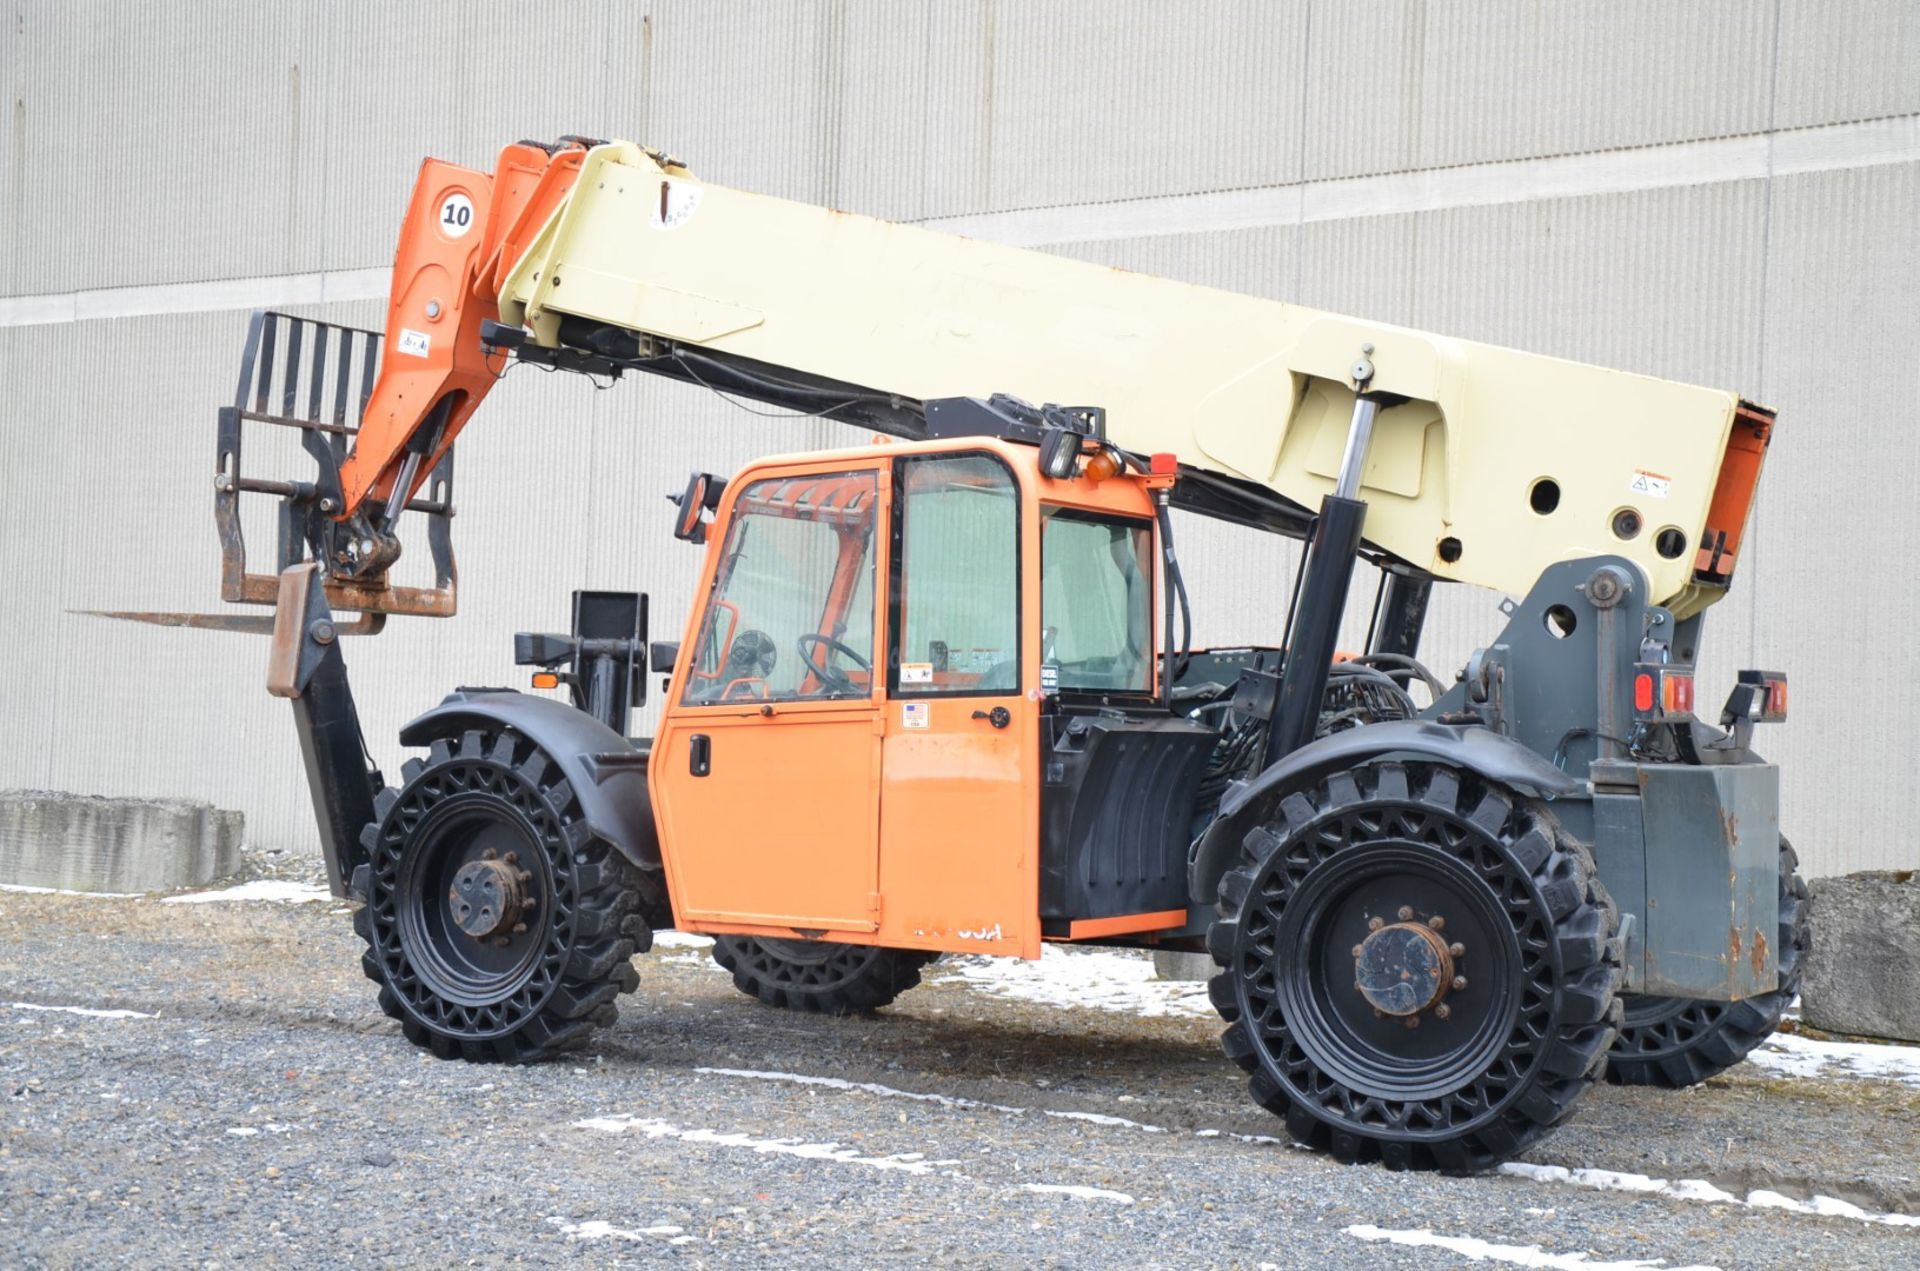 JLG (2011) G10-55A 10,000 LBS. CAPACITY DIESEL TELEHANDLER FORKLIFT WITH 56' MAX VERTICAL LIFT, - Image 6 of 23